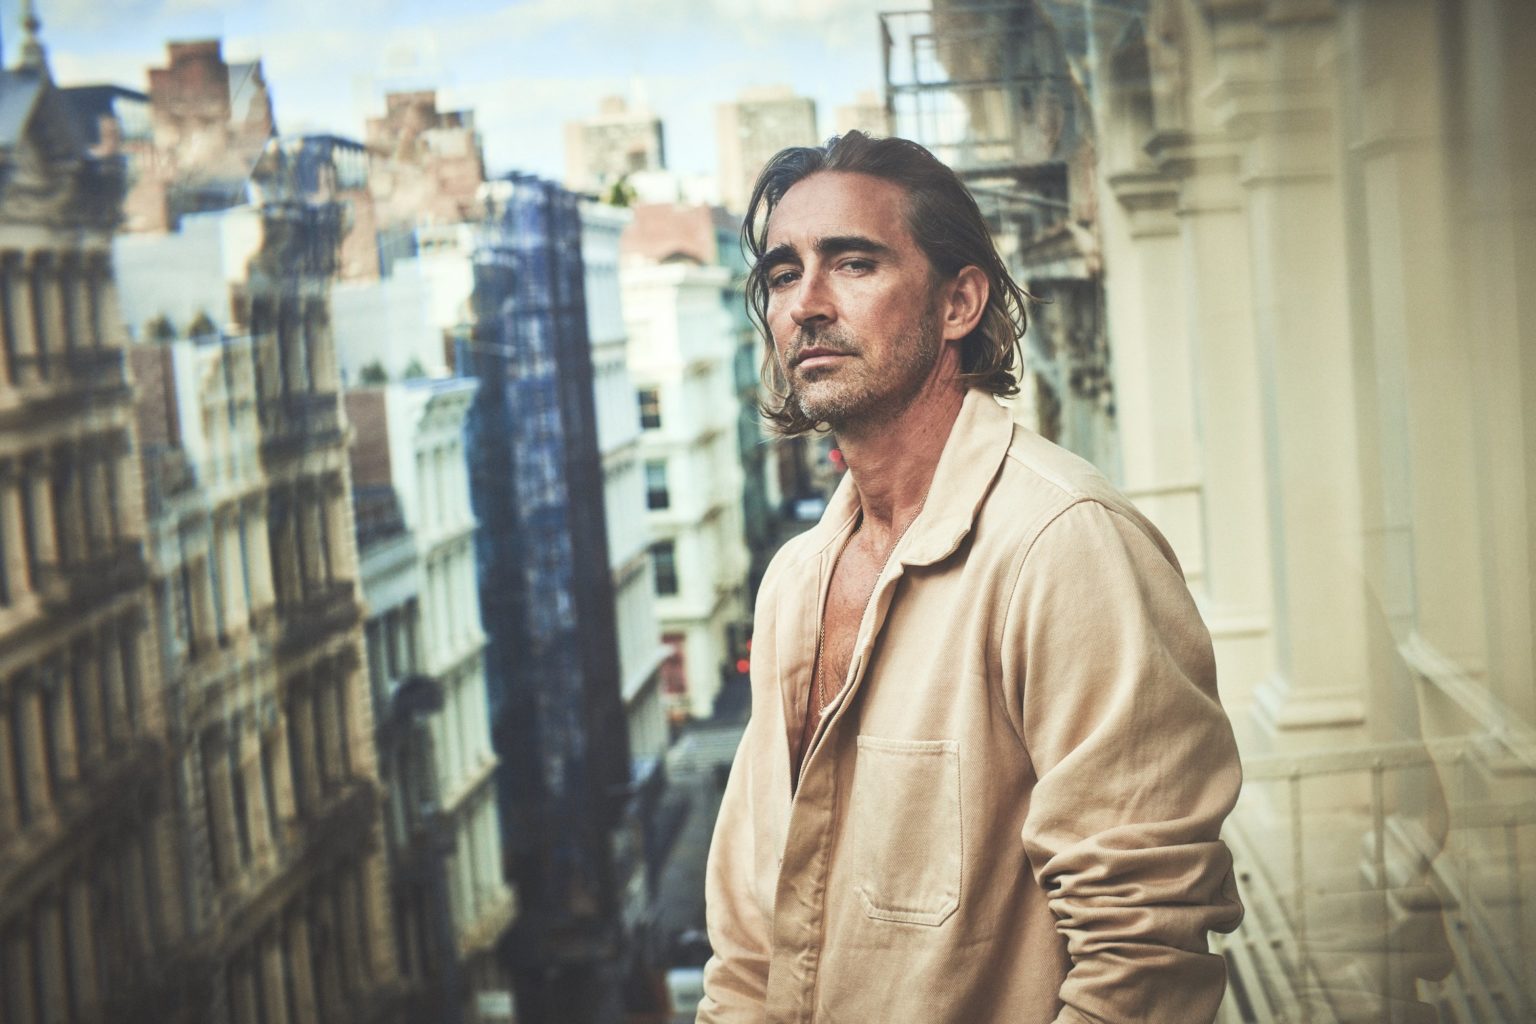 Lee-Pace-1536x1024